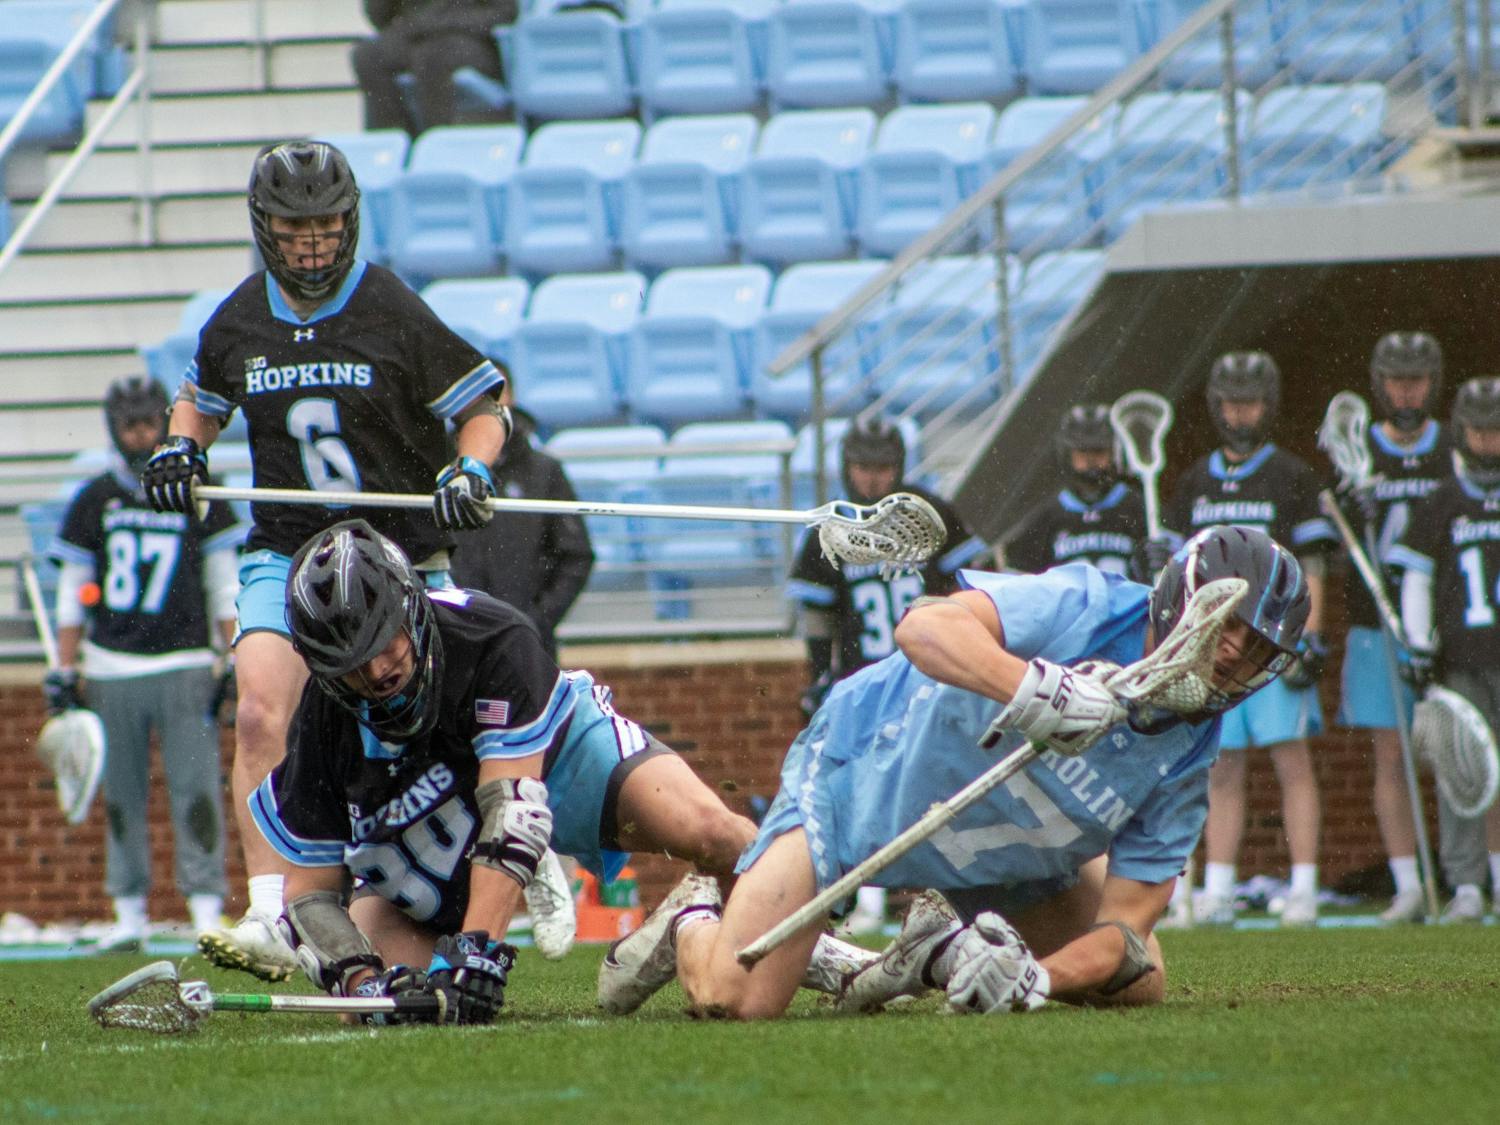 Senior face-off midfielder Zac Tucci (7) fights for possession of the ball in the Feb. 27 men's lacrosse game against Johns Hopkins University. UNC won 15-9.